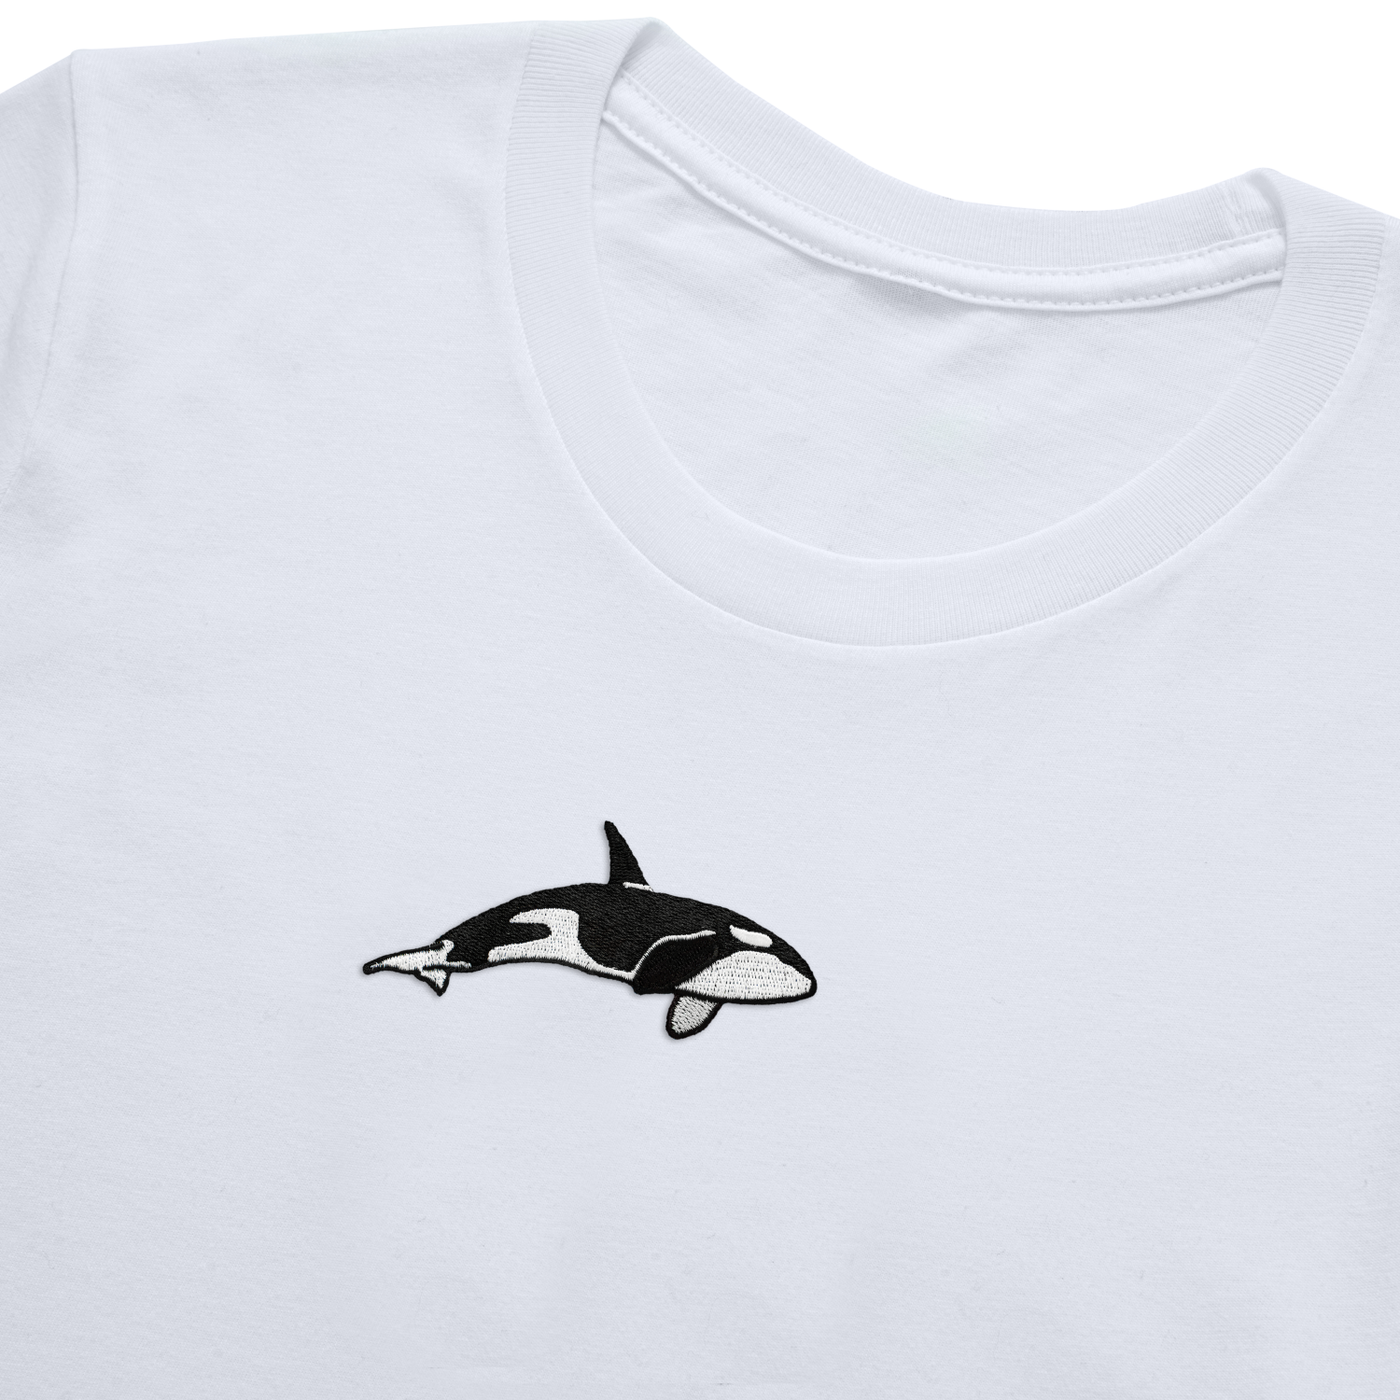 Bobby's Planet Women's Embroidered Orca T-Shirt from Seven Seas Fish Animals Collection in White Color#color_white